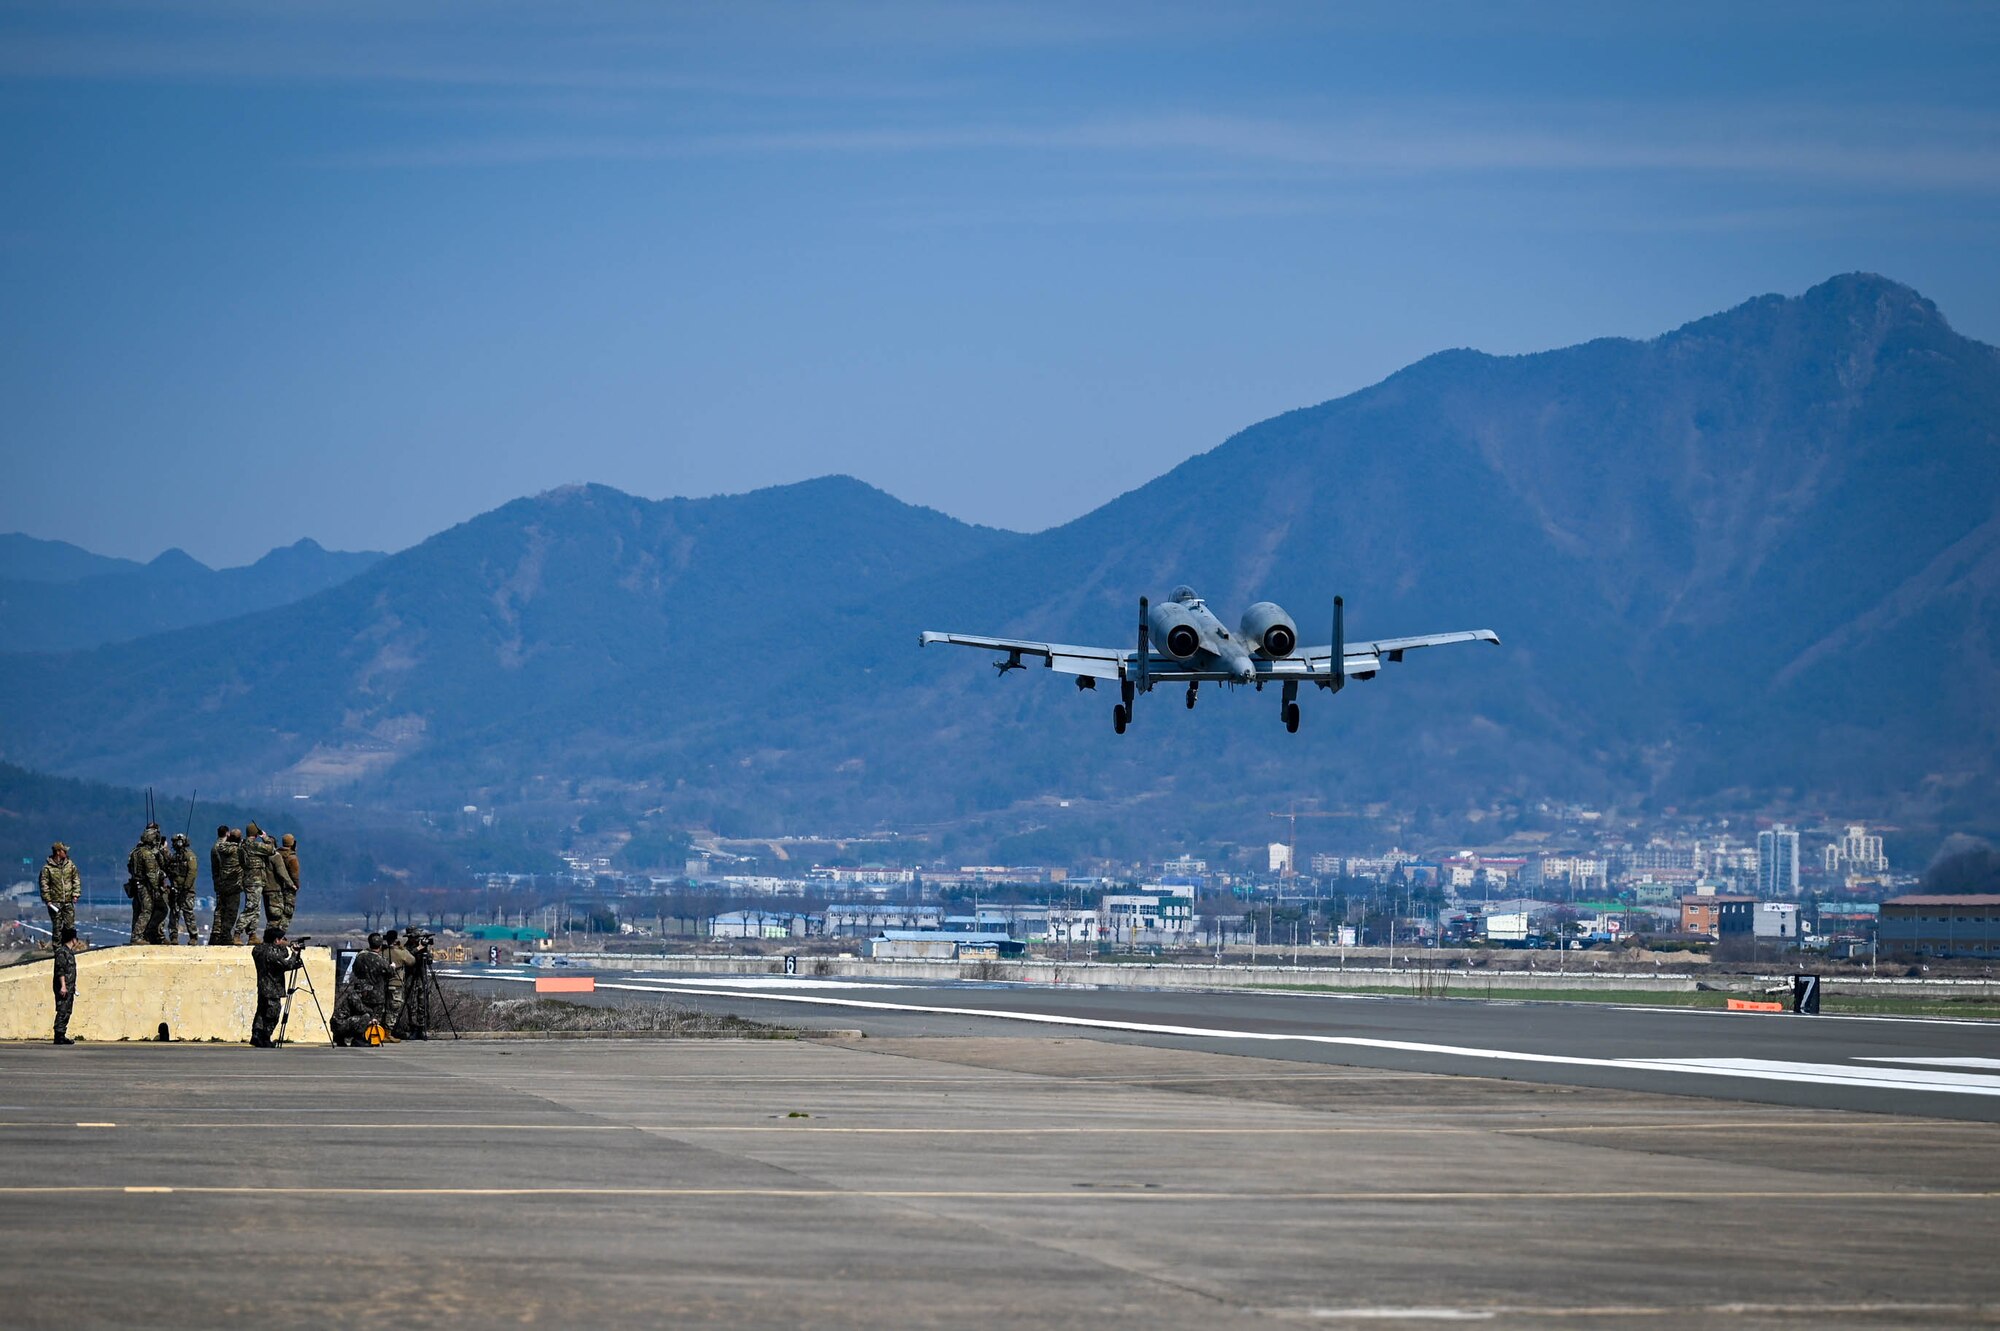 An A-10 Thunderbolt II “Warthog” from the 25th Fighter Squadron performs a low pass over an emergency landing site training event near Namji, Republic of Korea, March 13, 2024.